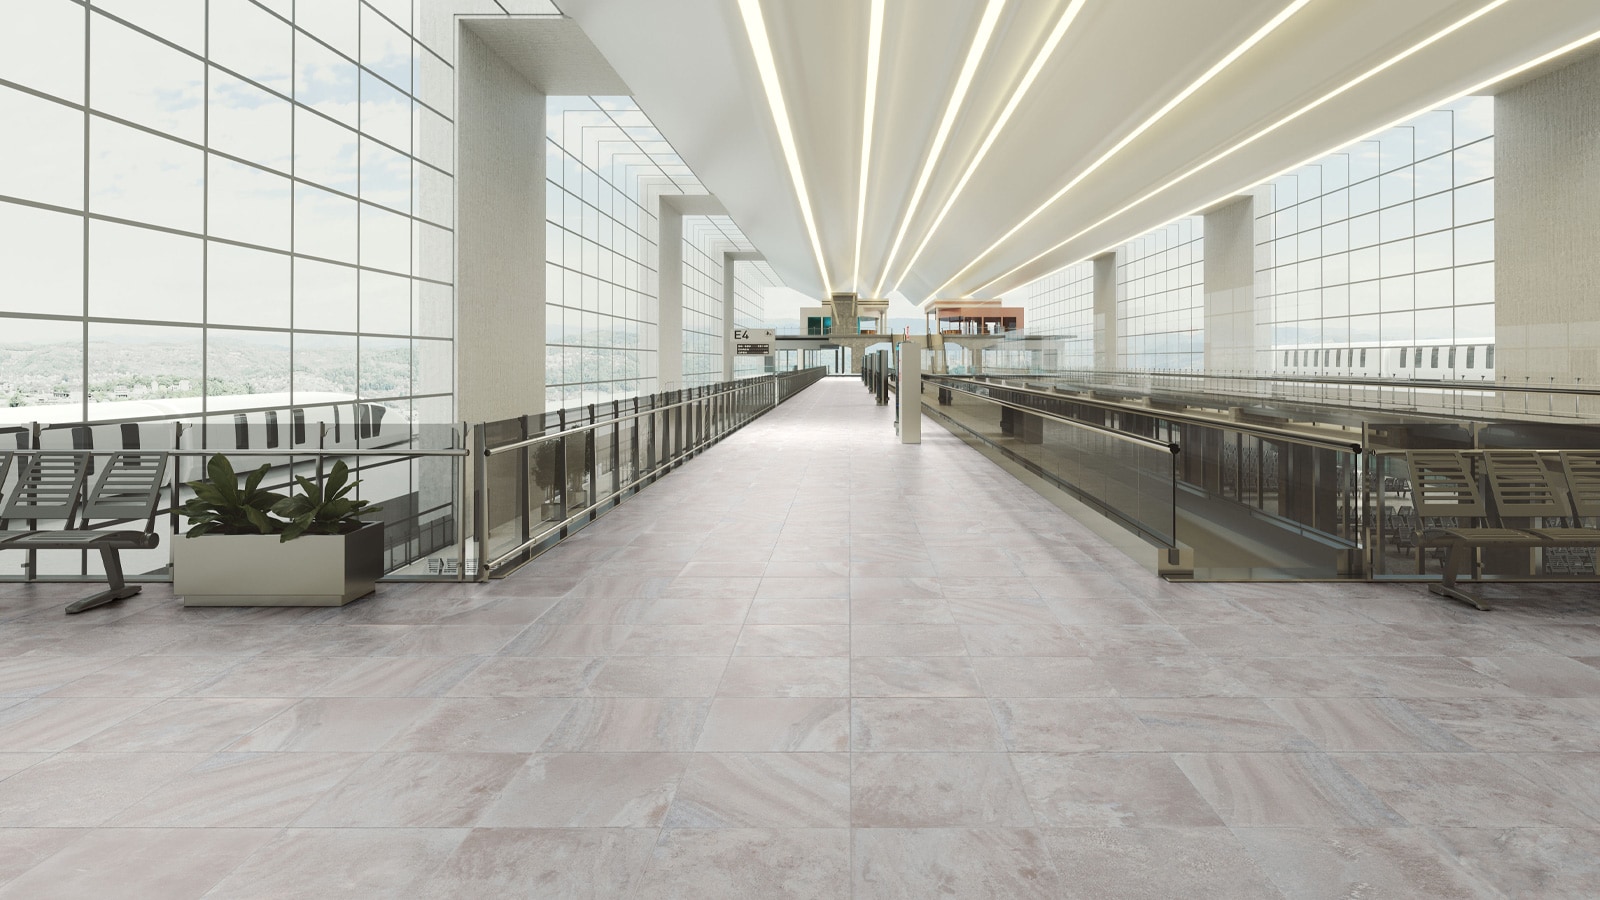 Technical porcelain tiles by Porcelanosa: made for large-scale projects